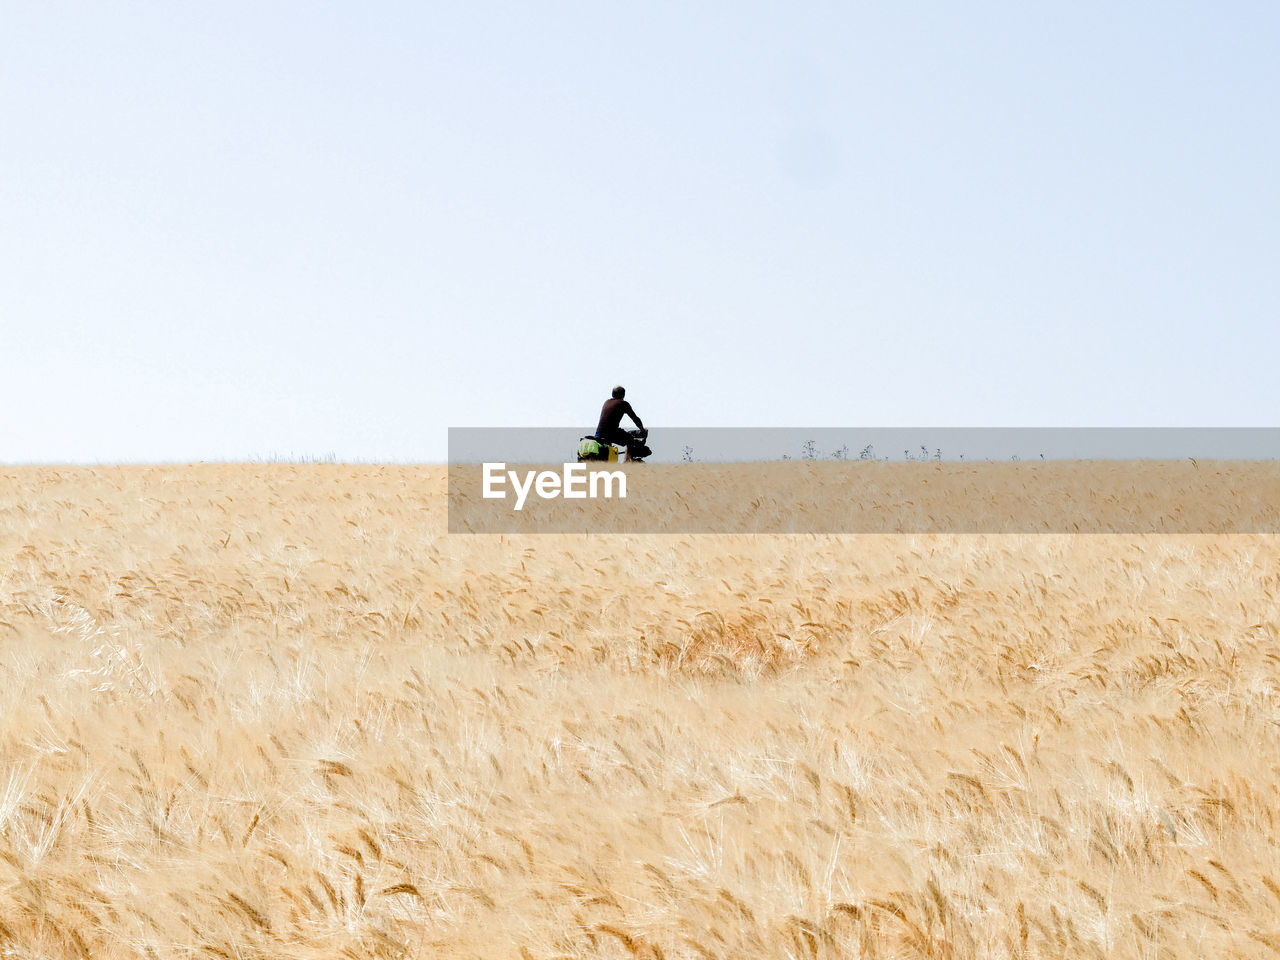 Man riding bicycle on wheat field against clear sky